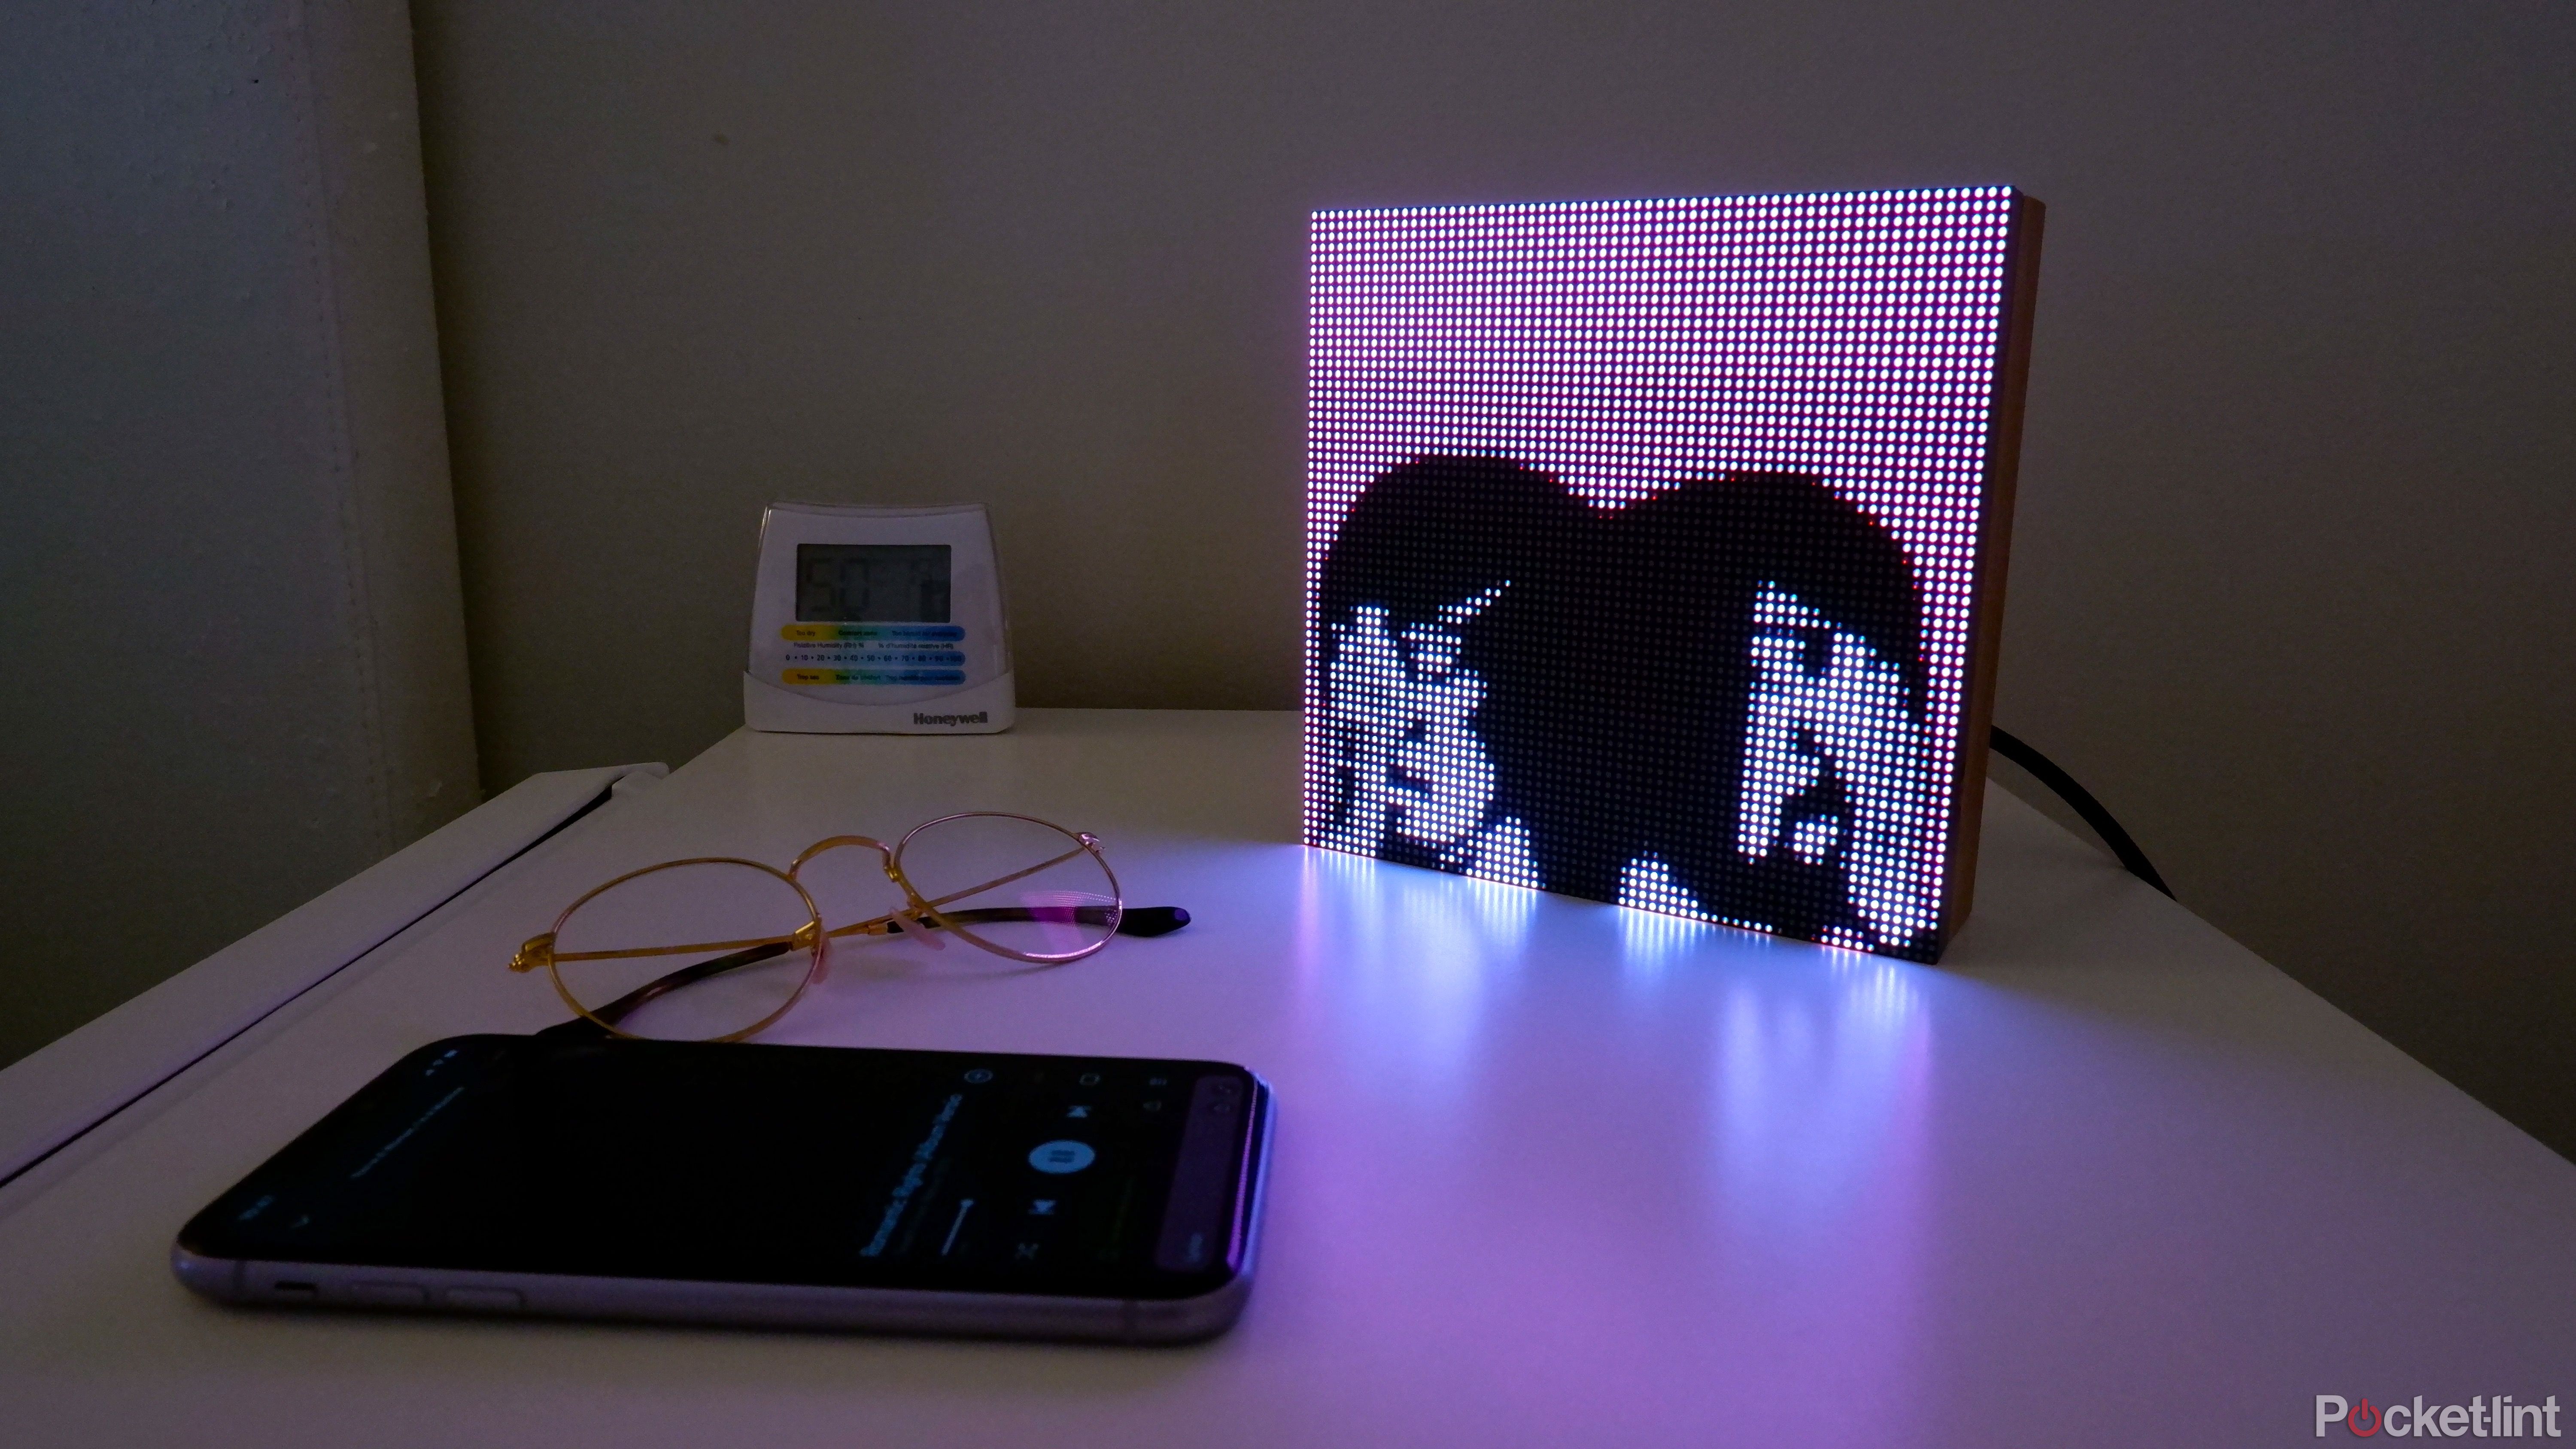 A Tuneshine on a bed side table displaying album art for Death from Above 1979, next to an iPhone and a pair of glasses.